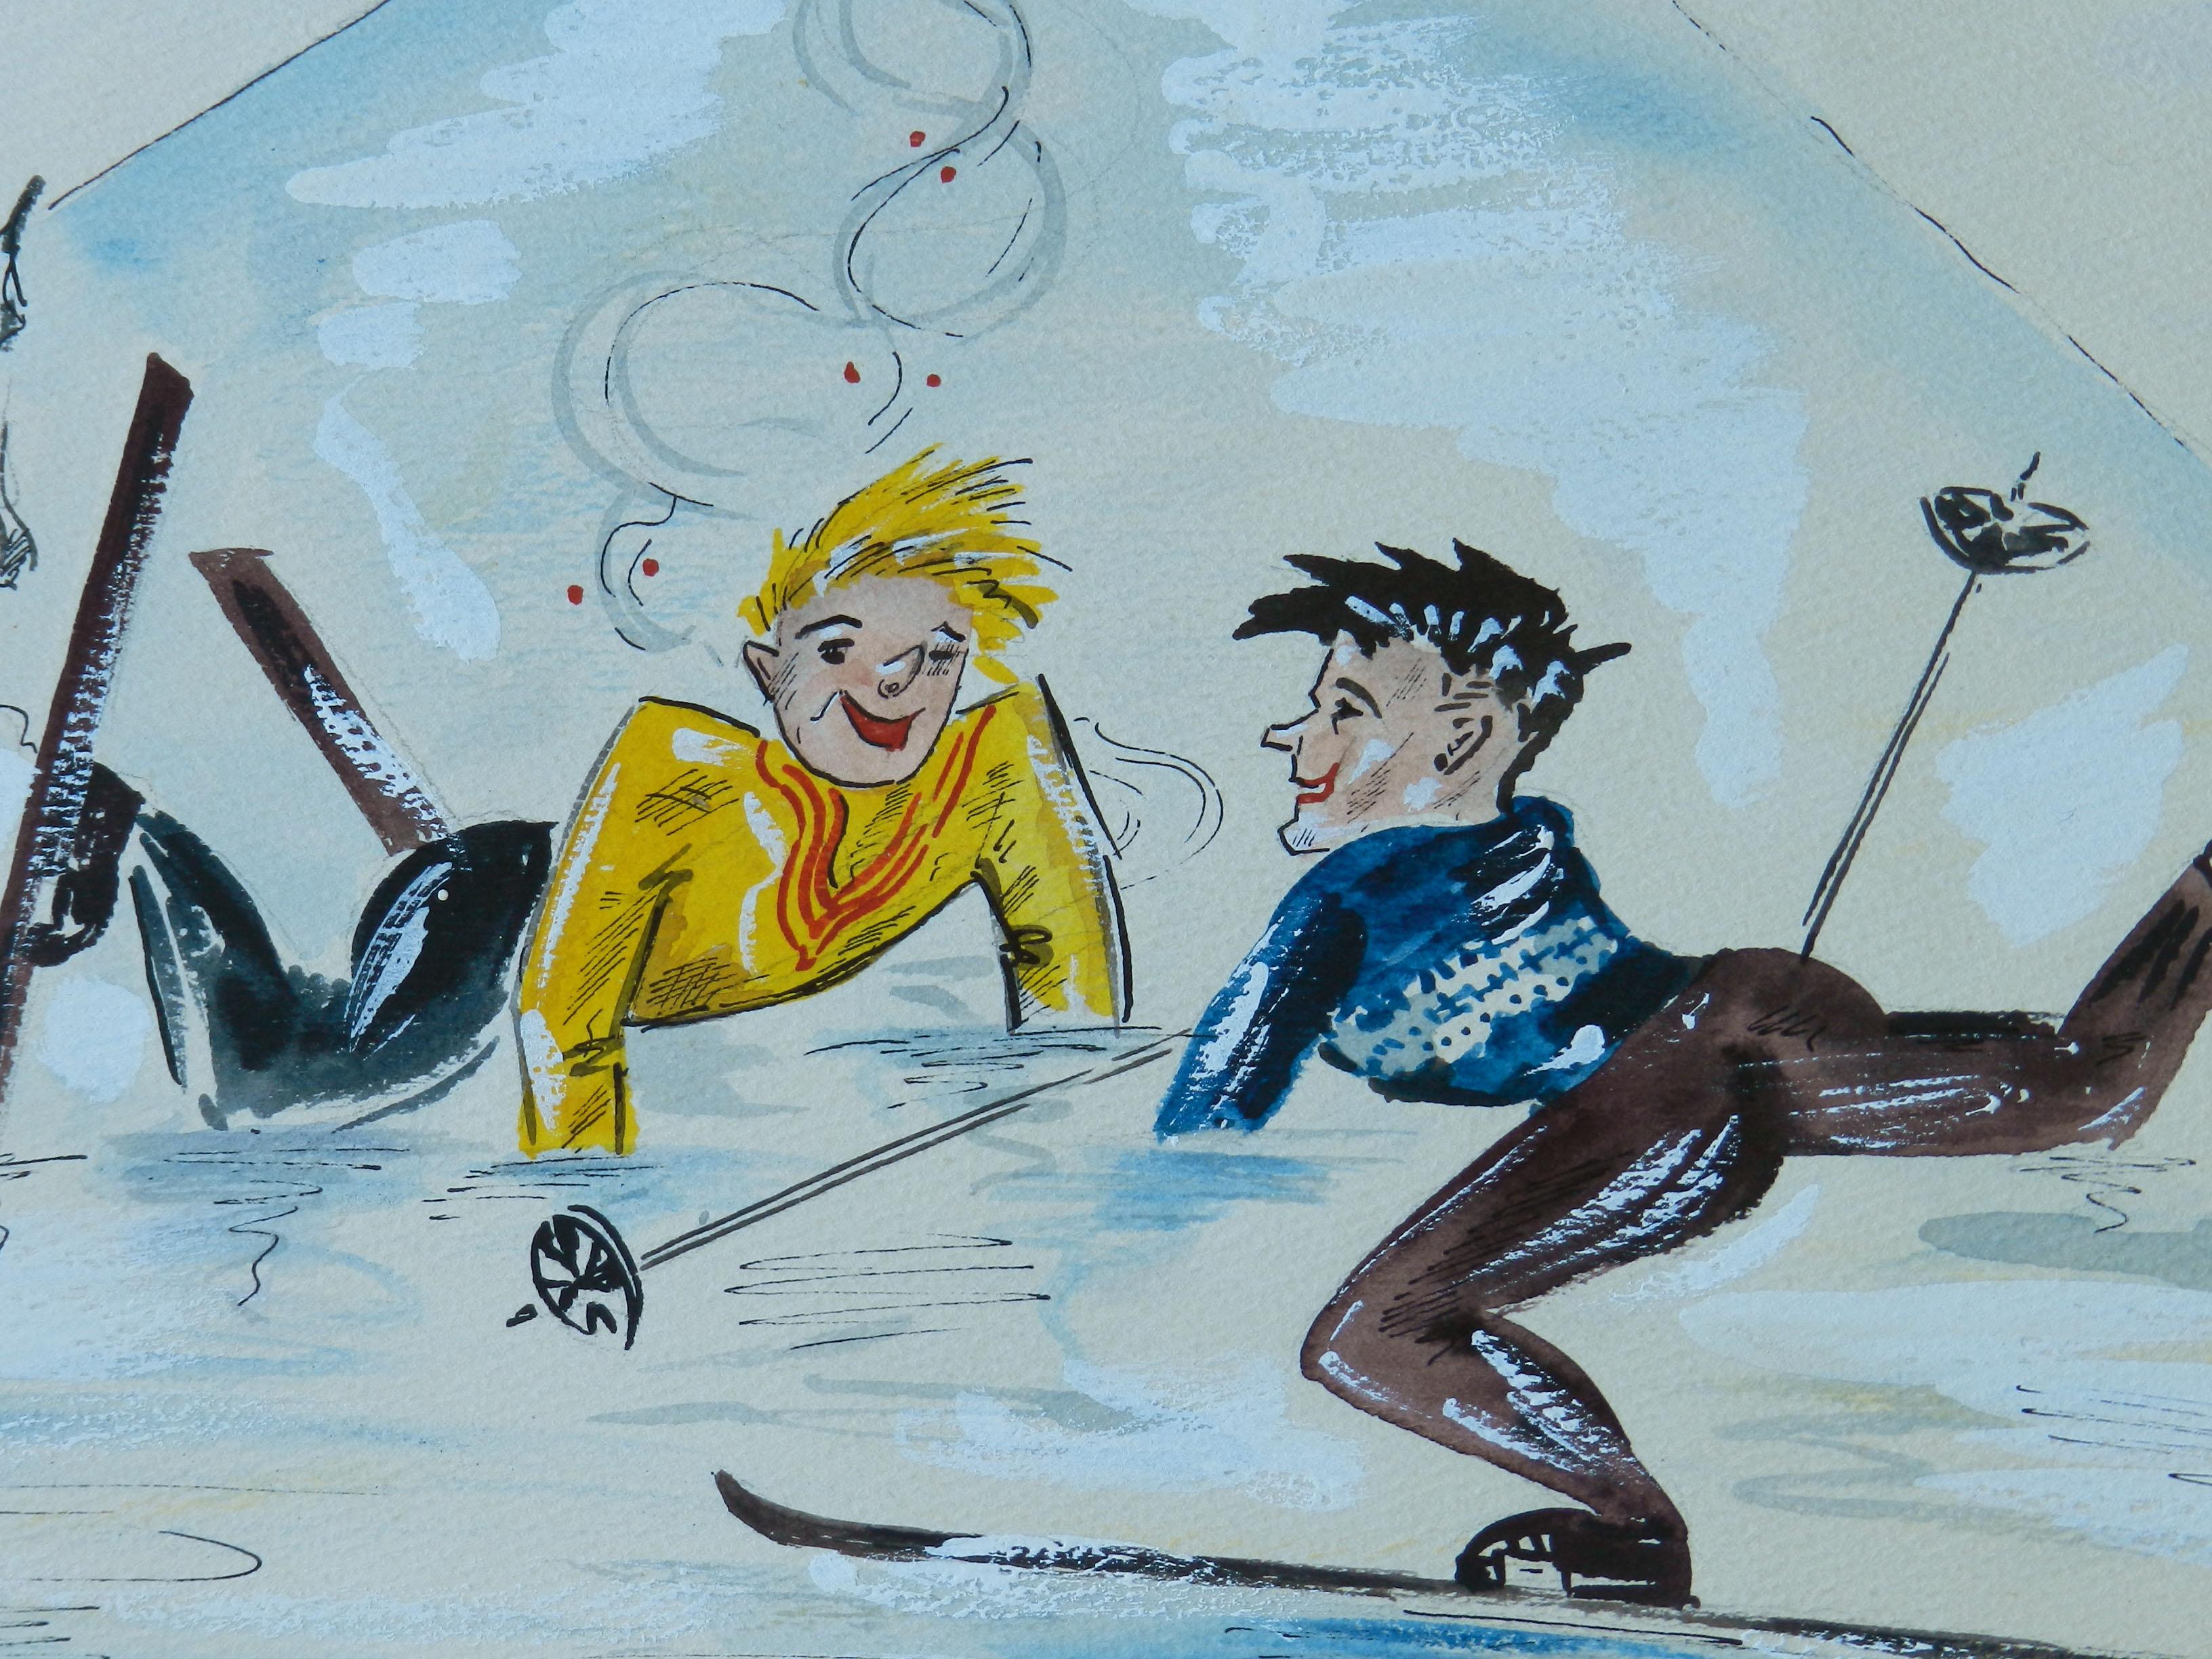 Skiers Amusing Caricature Artist Signed Watercolor Mid Century c1952
Signed by artist Robin Way
Frame included (no glass for shipping)
Good vintage condition

